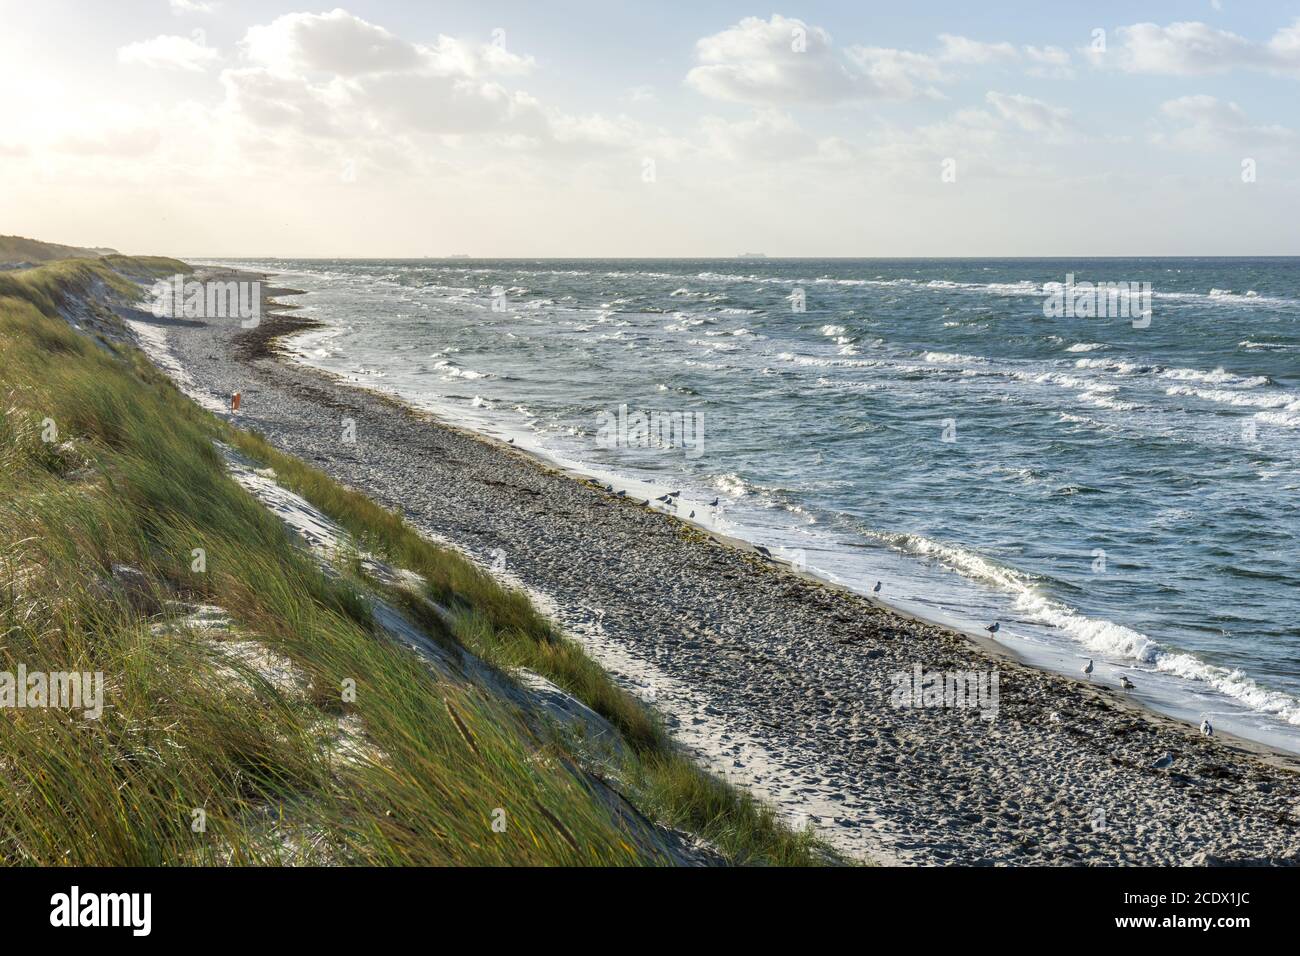 Stormy sea at the Eastsea in Germany Stock Photo